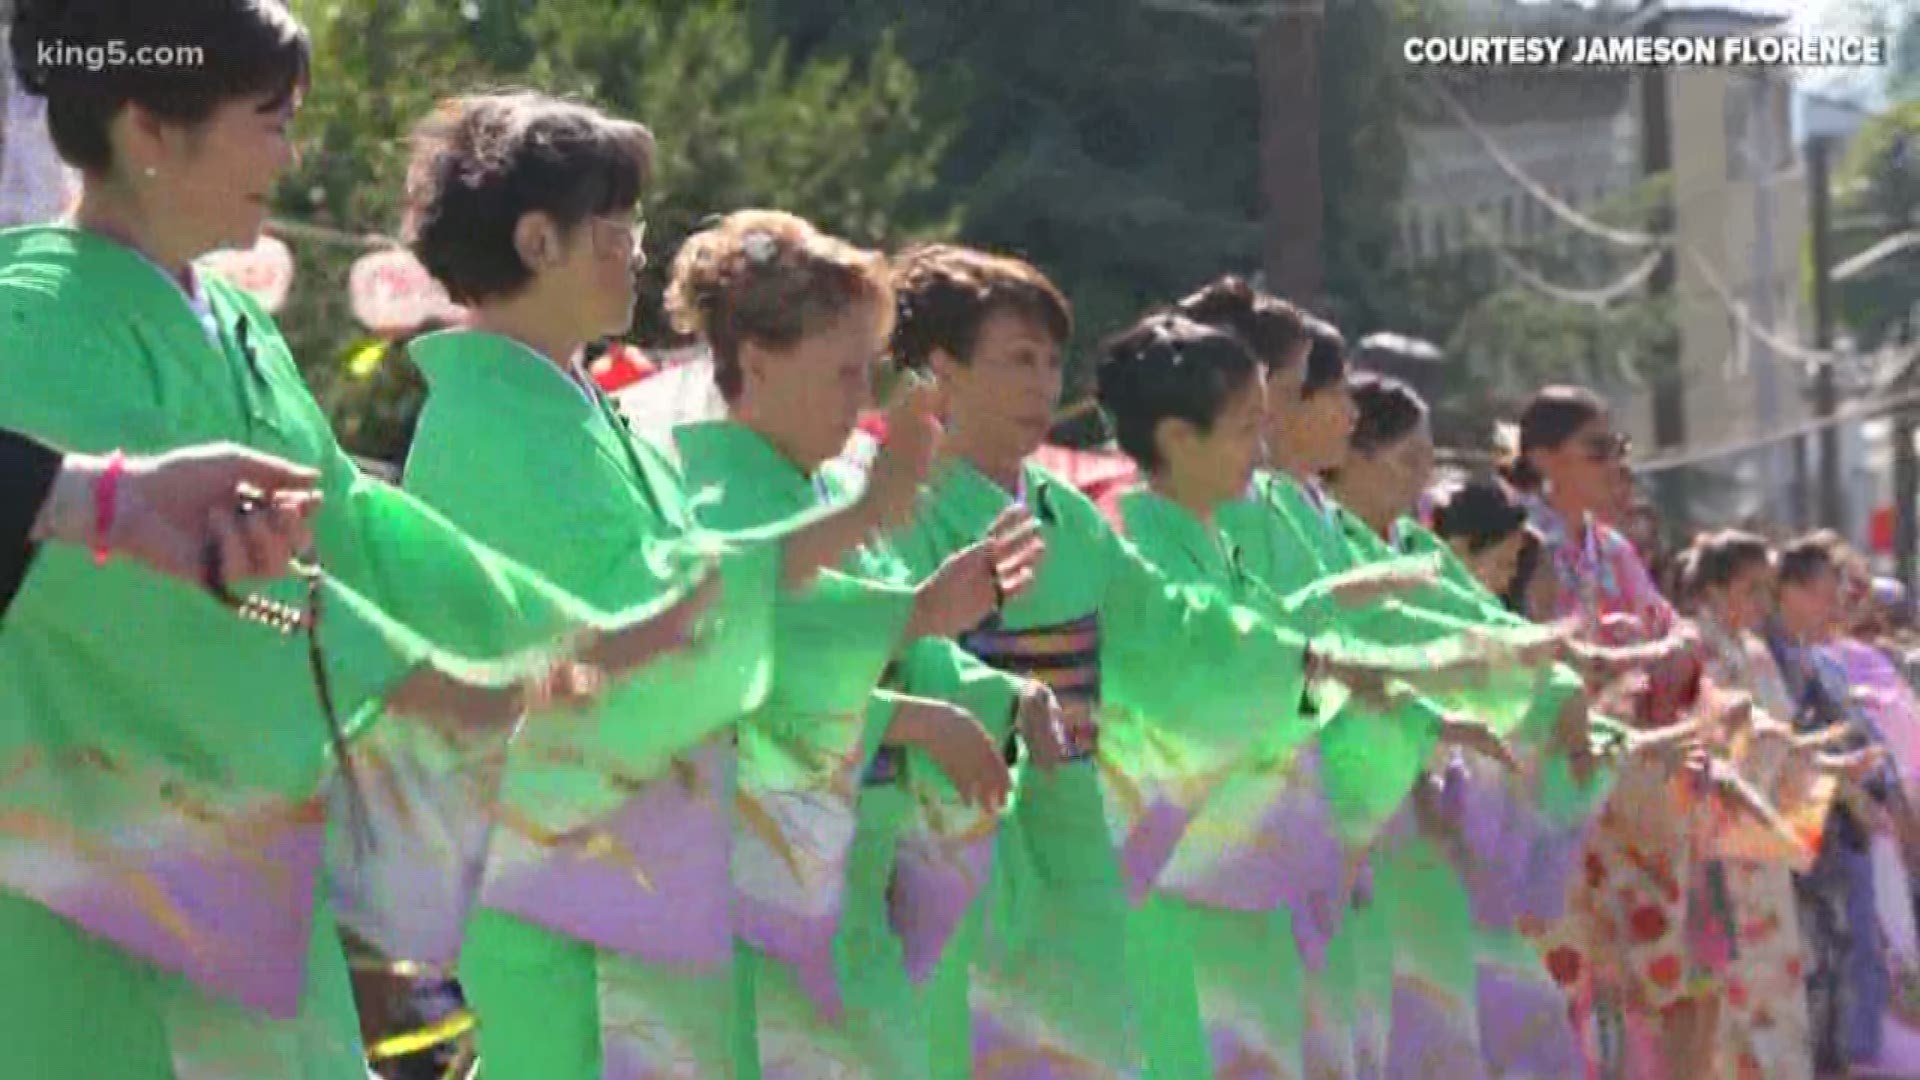 The Japanese festival features dancing, drumming, food stalls and a beer garden.